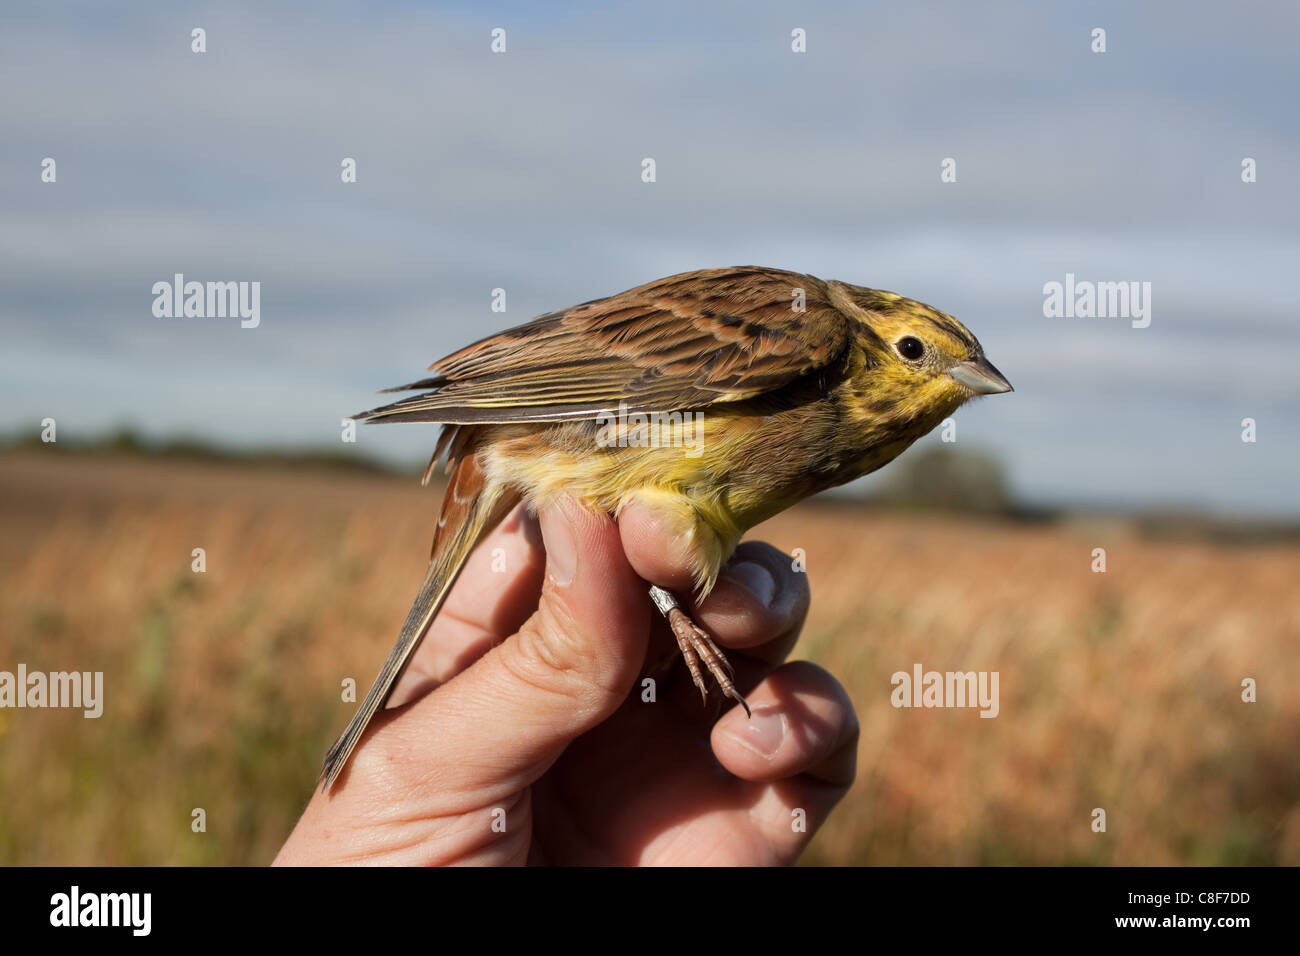 Bird ringer holding a Yellowhammer, Emberiza citrinella, in the ringers' grip, ready for taking biometric measurements Stock Photo